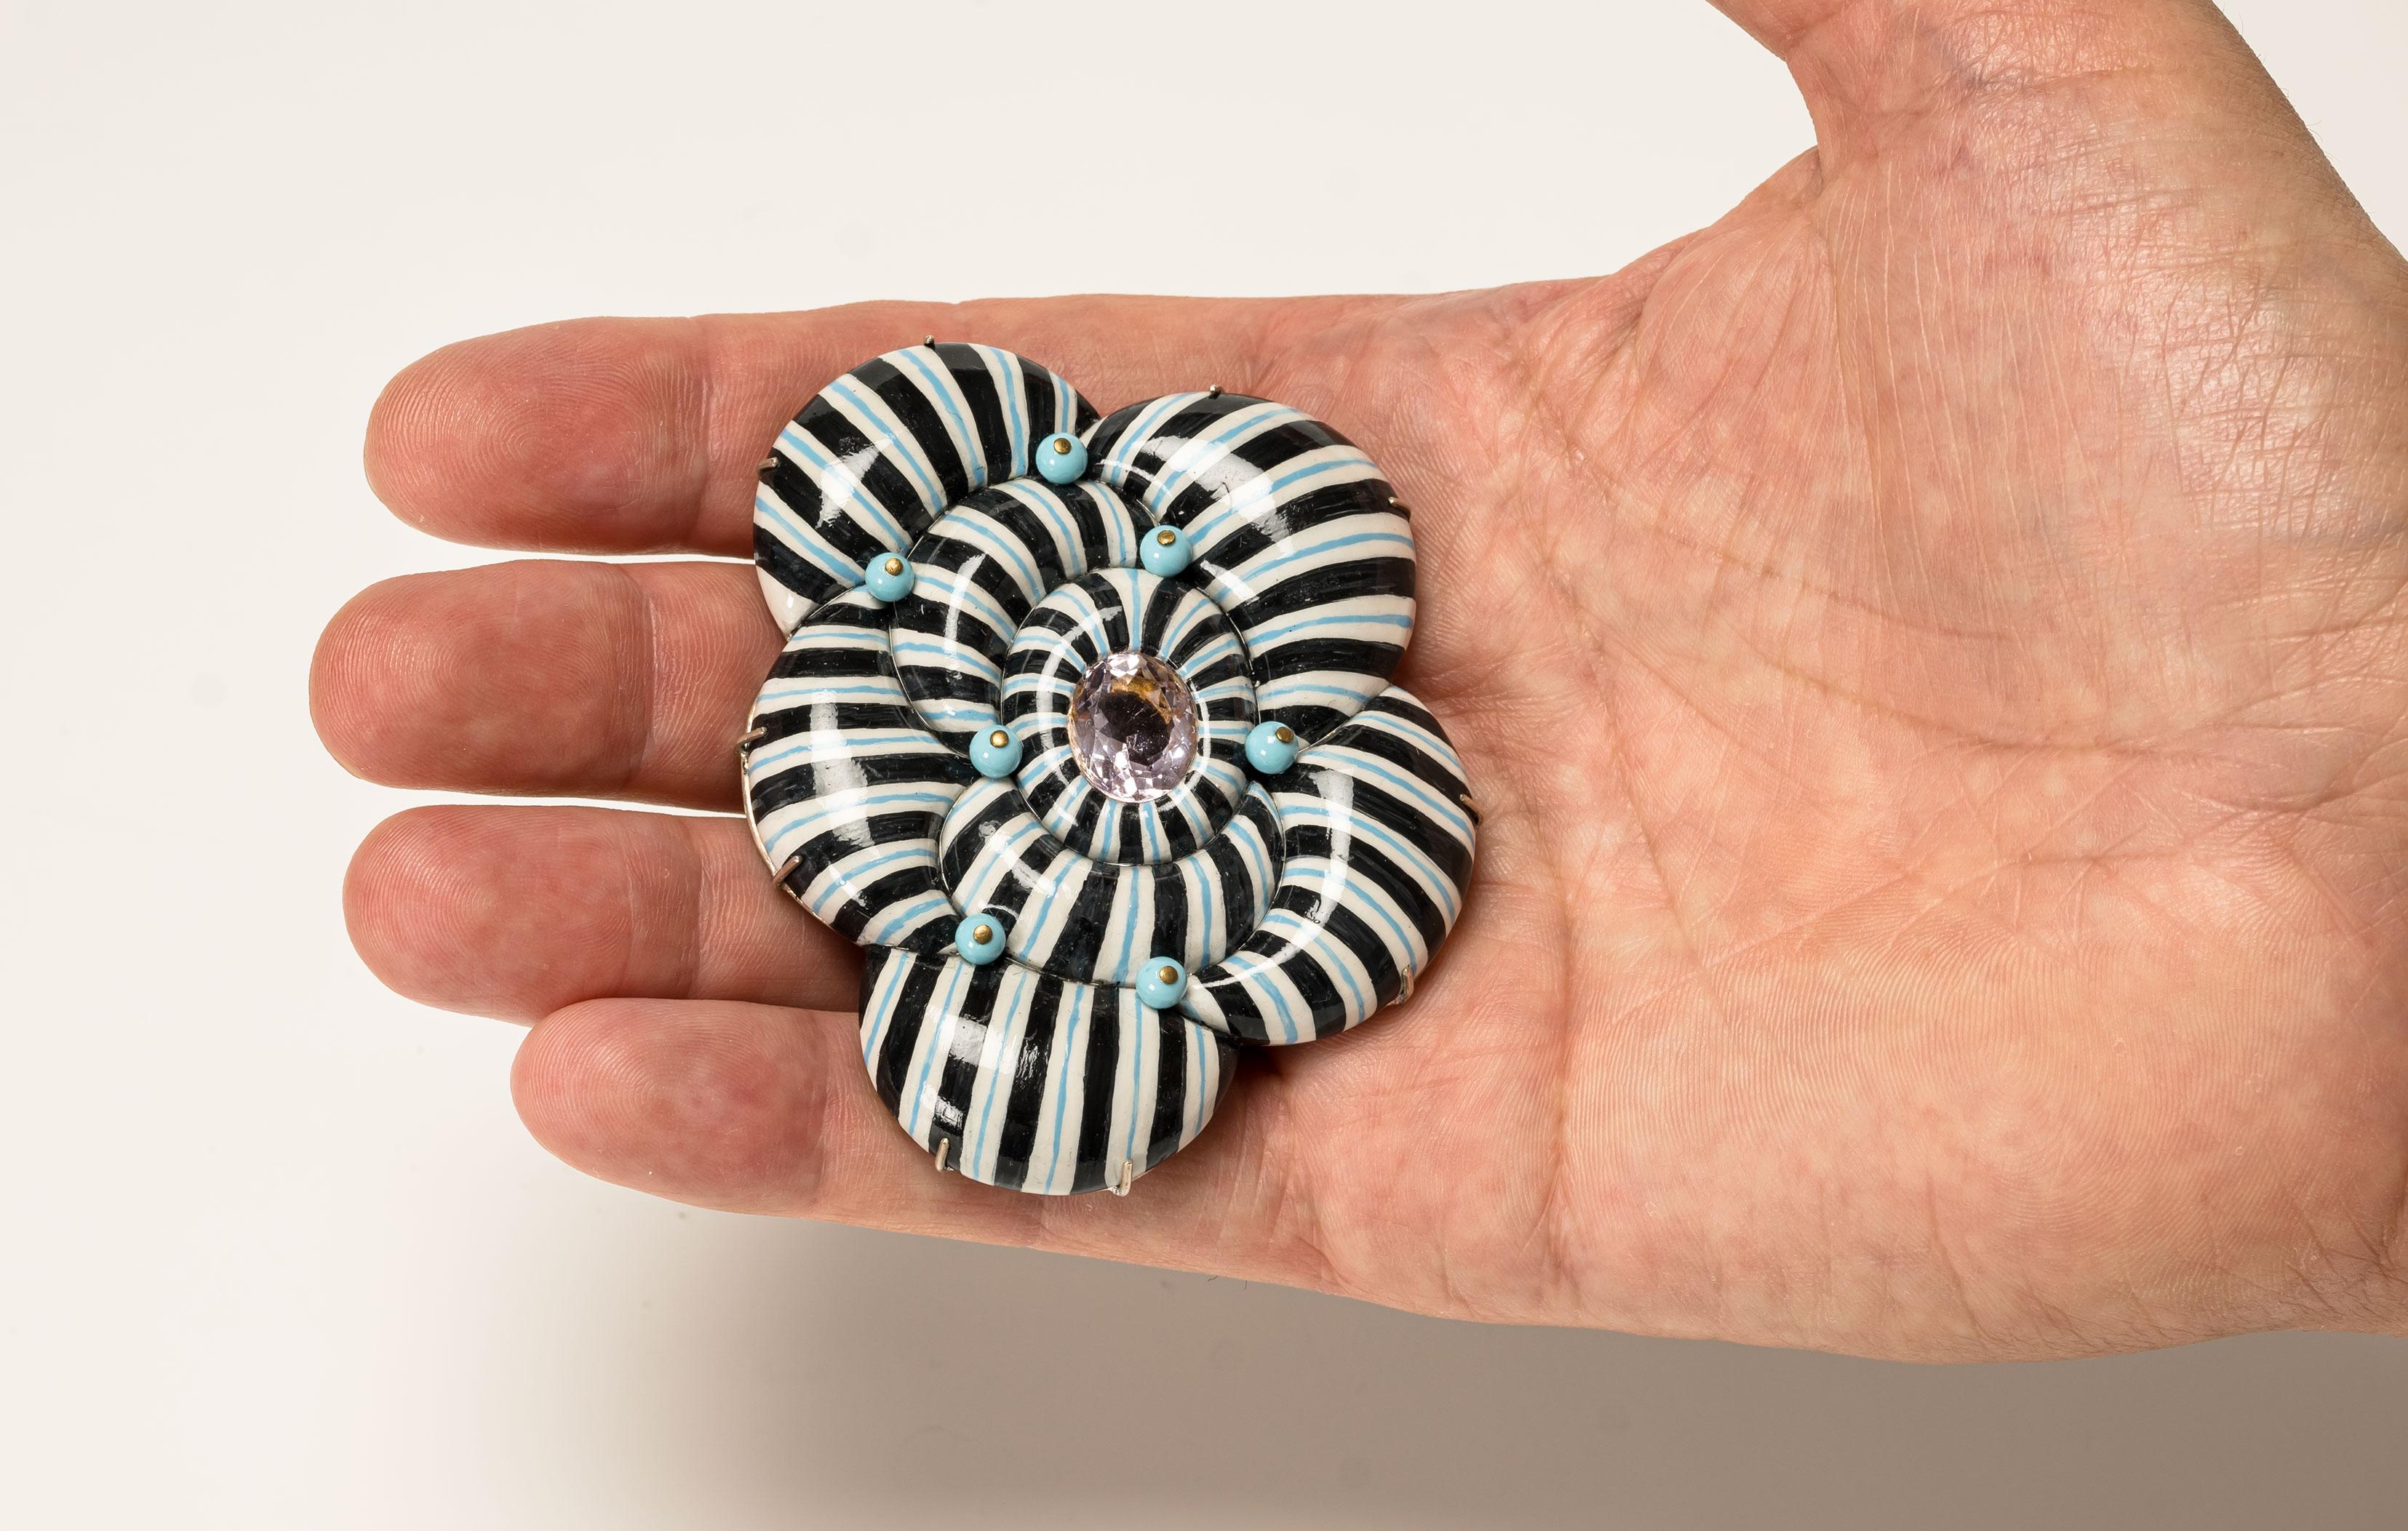 Brooch “Memini”, 2021, is a one-of-a-kind contemporary author jewelry by italian artist Gian Luca Bartellone.
Materials: papier-mâché, silver, steel, amethyst, turquoise paste, gold leaf 22kt.

Great appearance with this dynamic line concept.